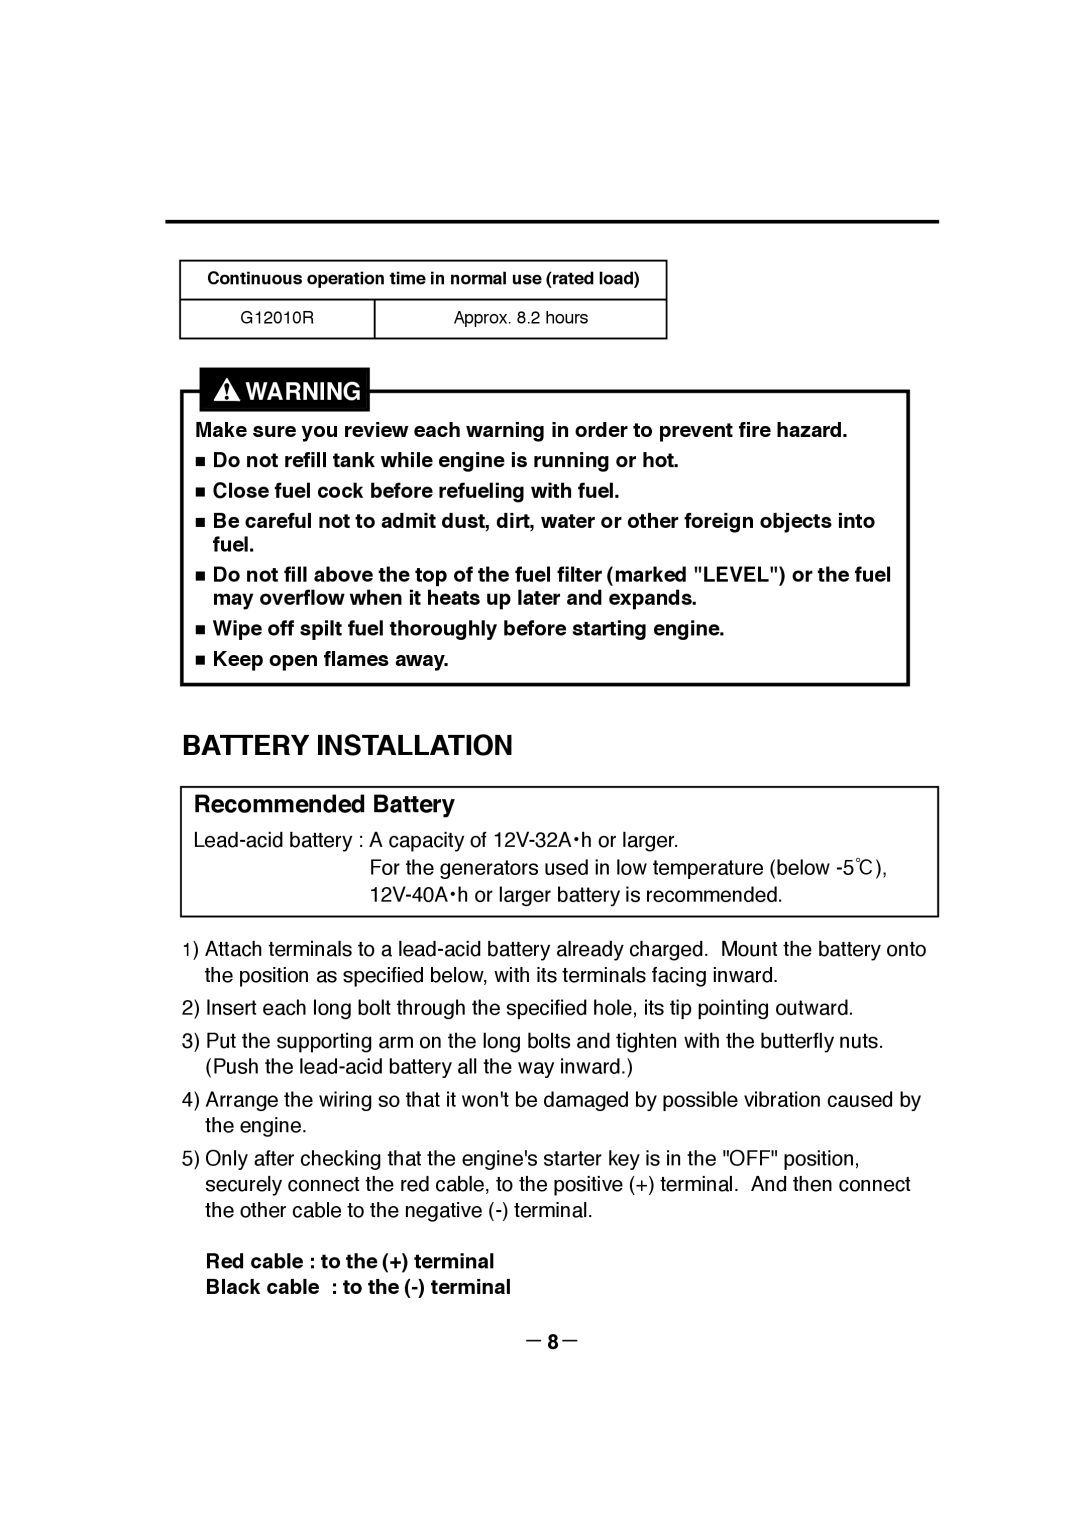 Makita G12010R manual Battery Installation, Recommended Battery 